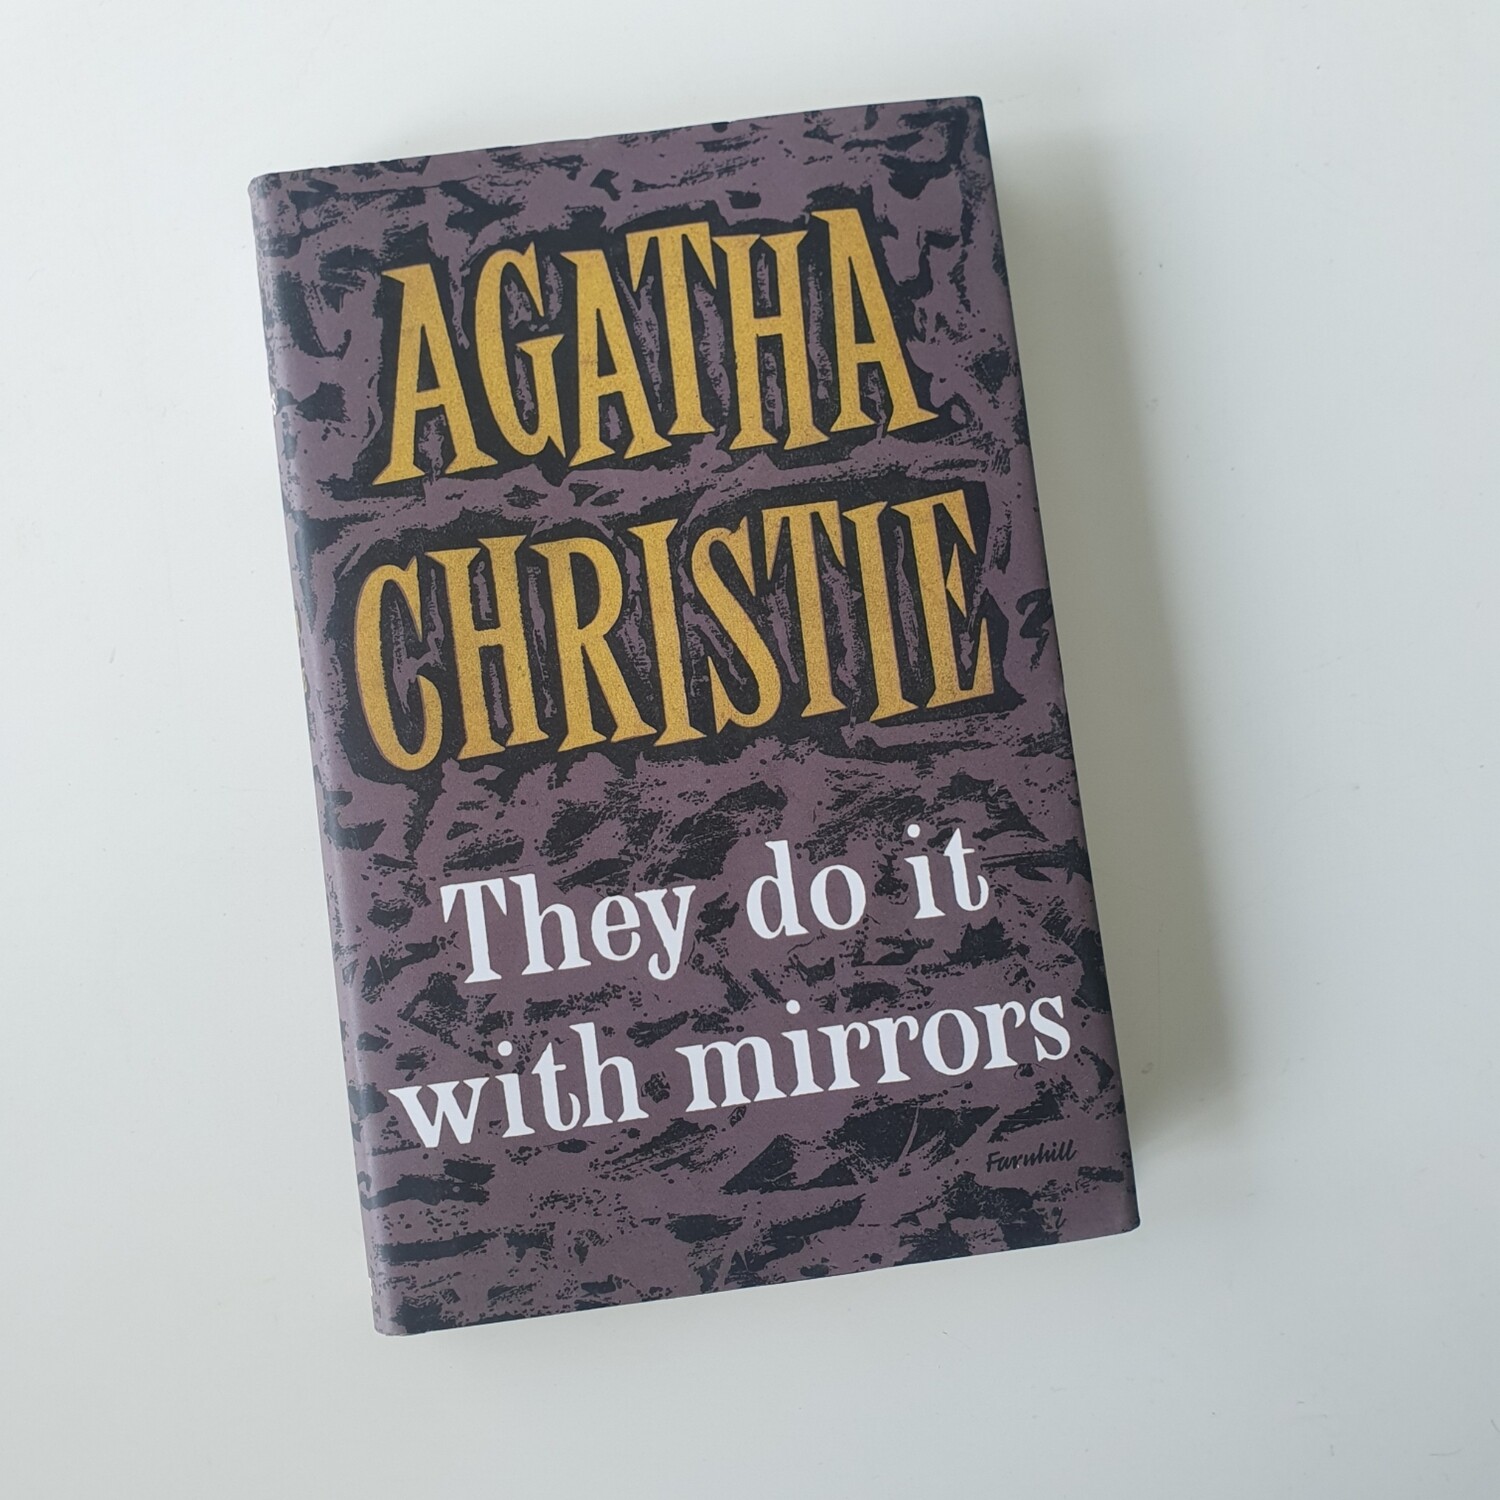 Agatha Christie - They Do It With Mirrors Notebook - made from a dust jacket